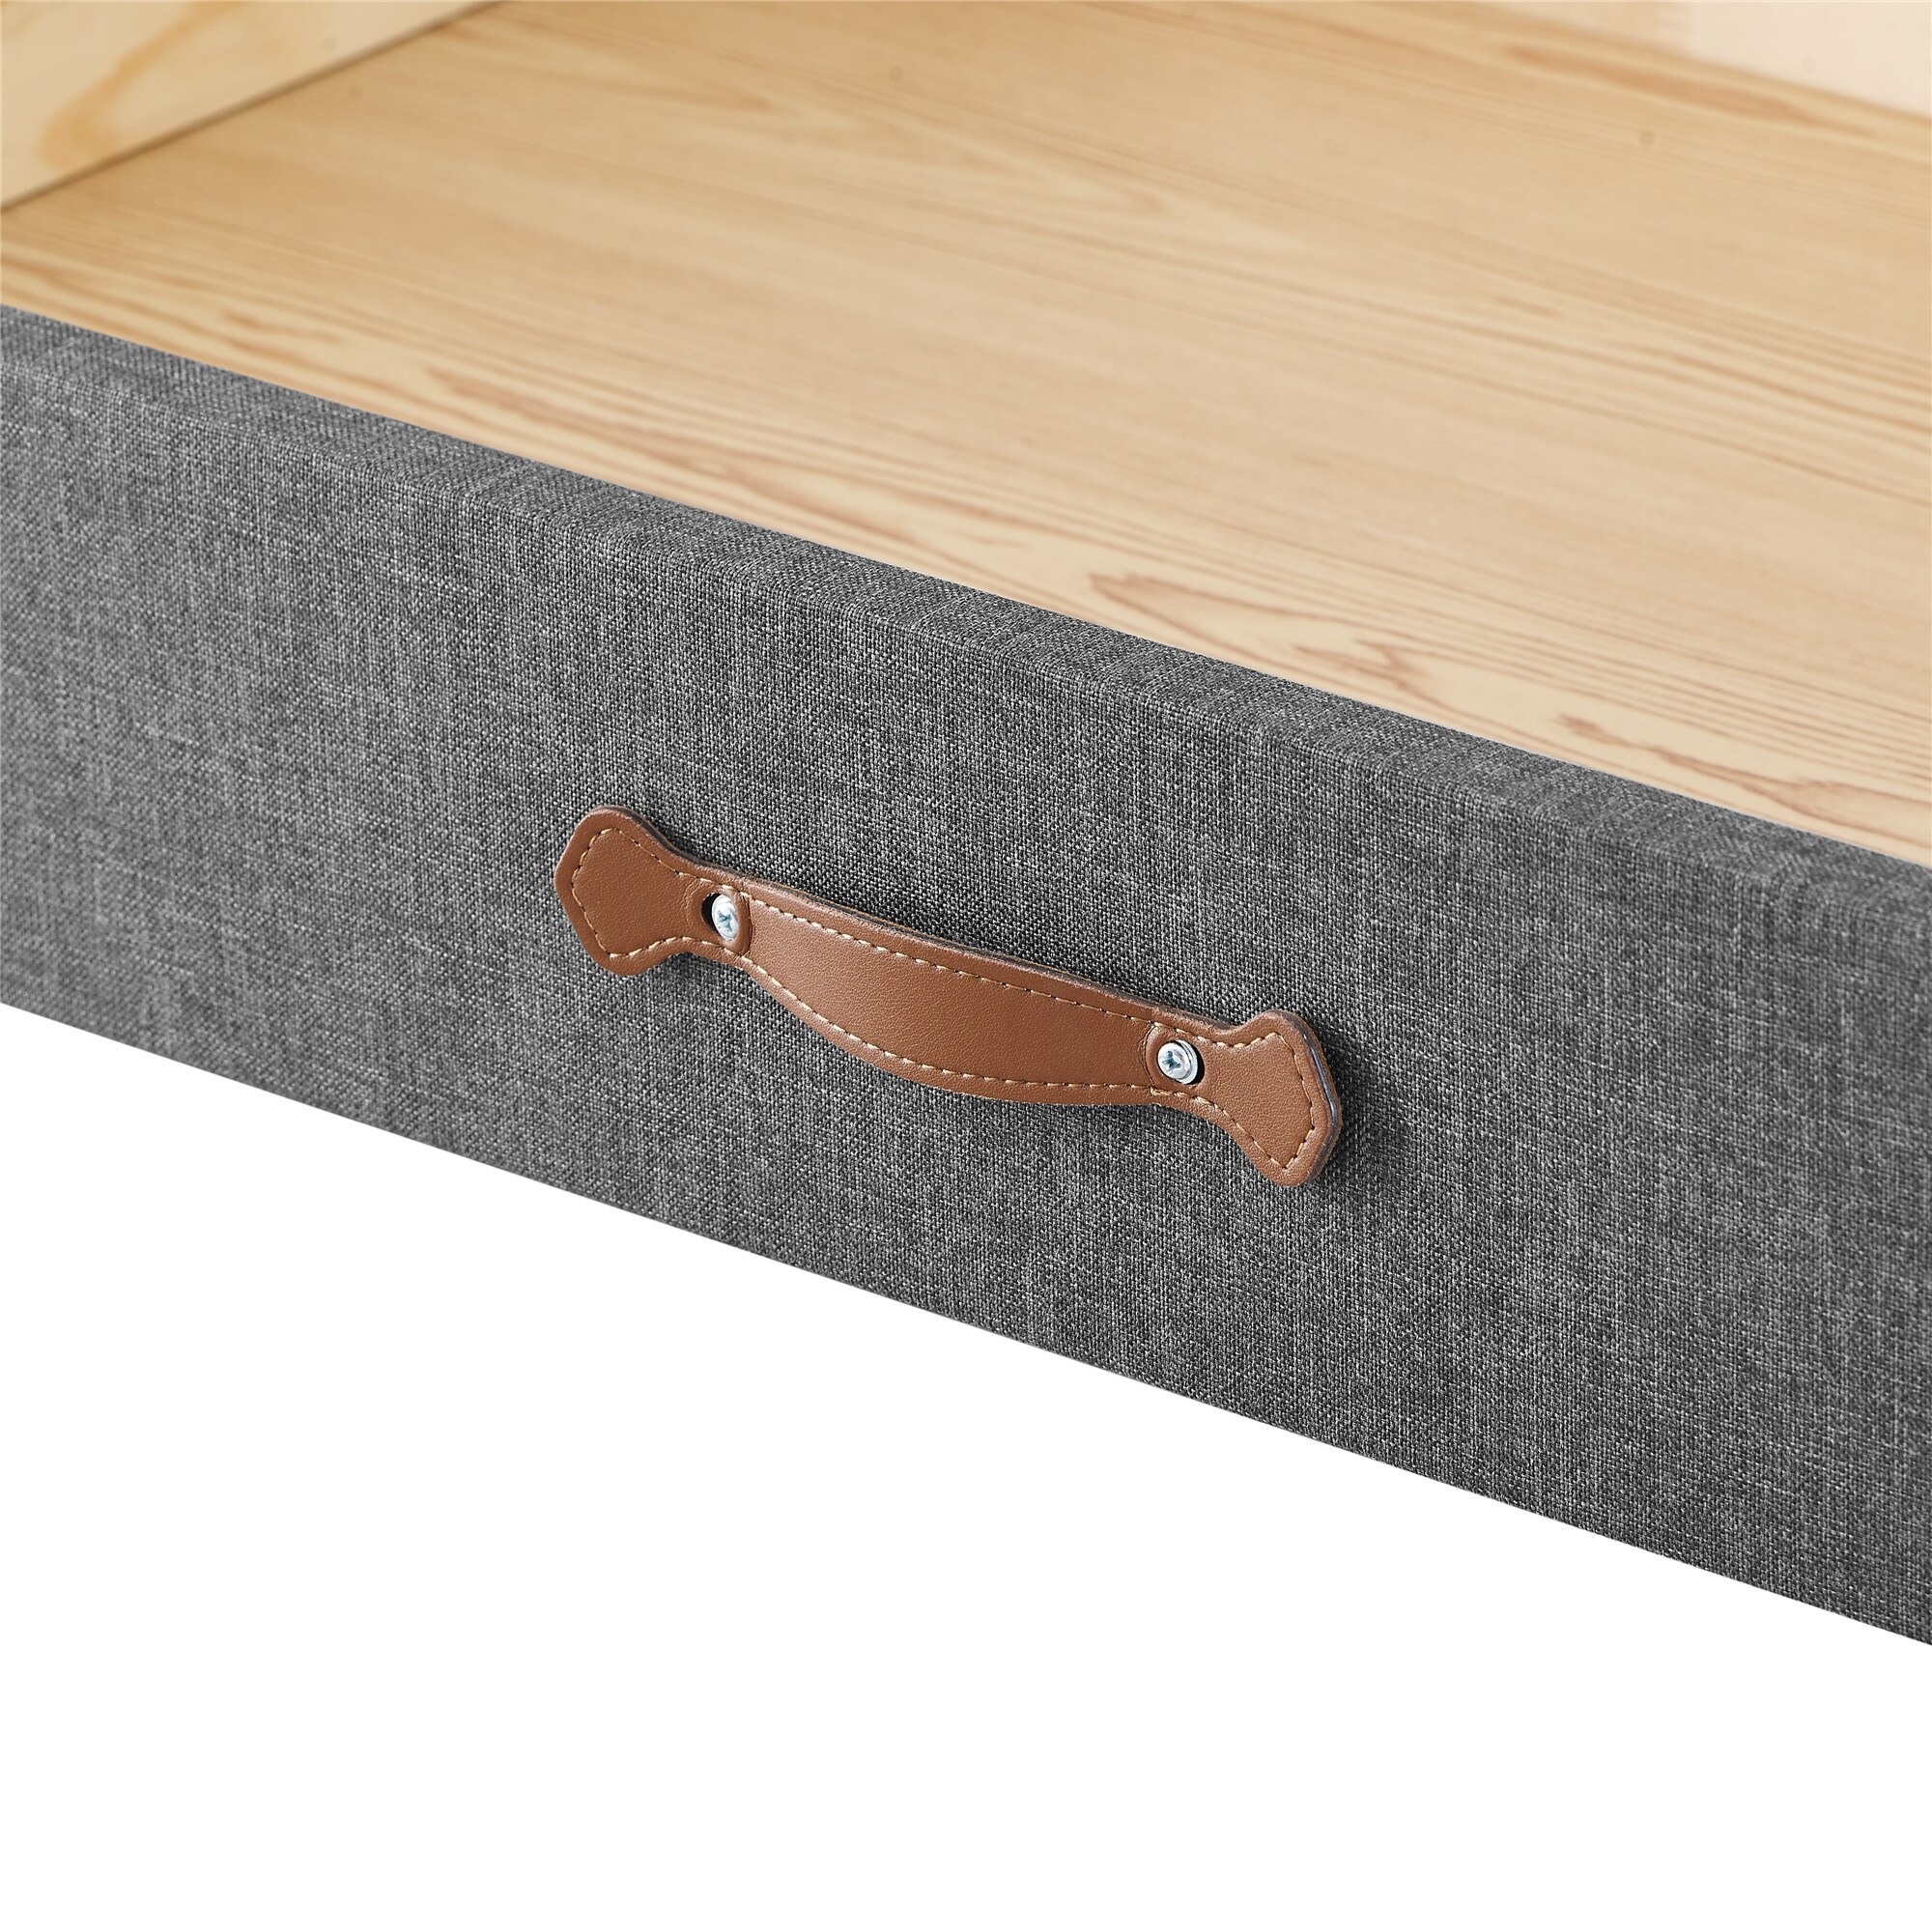 MUSEHOMEINC Upholstered Solid Wood Under Bed Storage Organizer Drawer with 4-Wheels for Bedroom/Leather Handle Underbed Storage QUEEN/KING - image 5 of 5